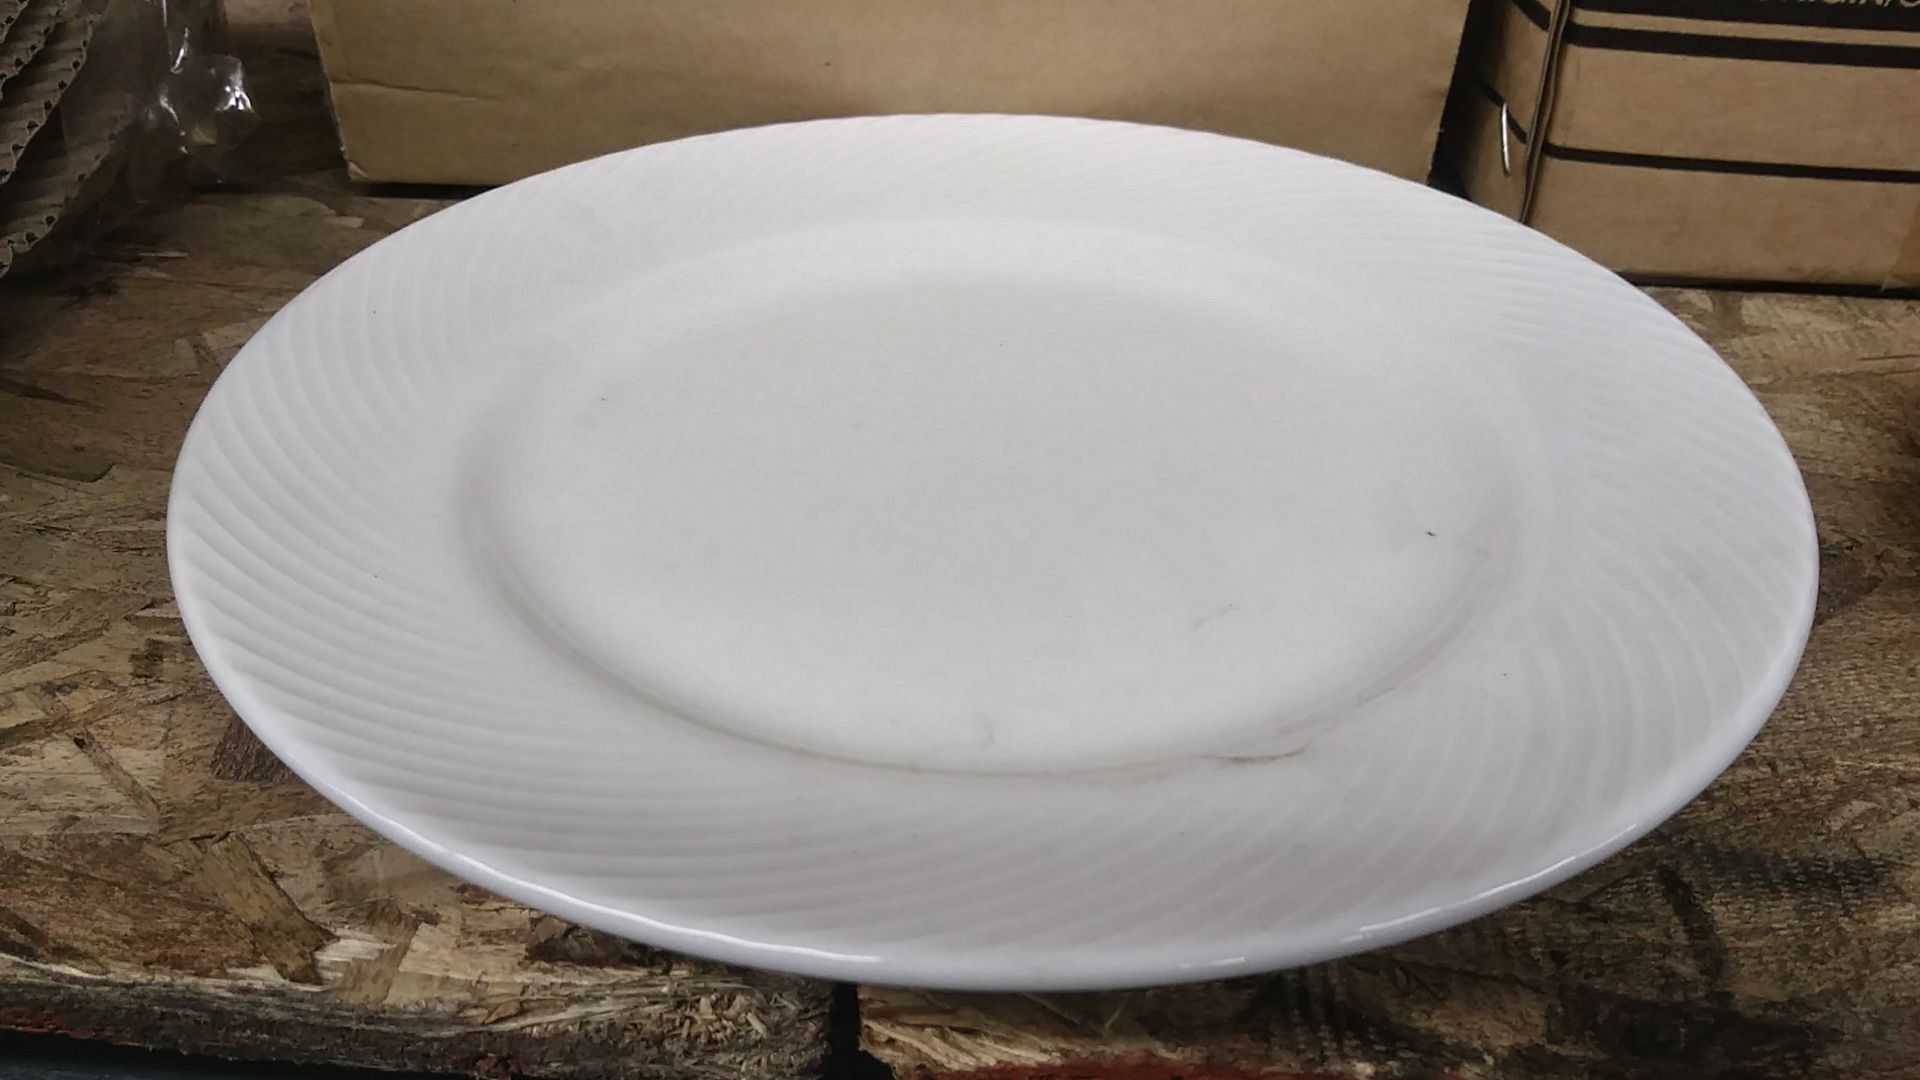 8" SWIRL PLATE (INCLUDES QTY 20)